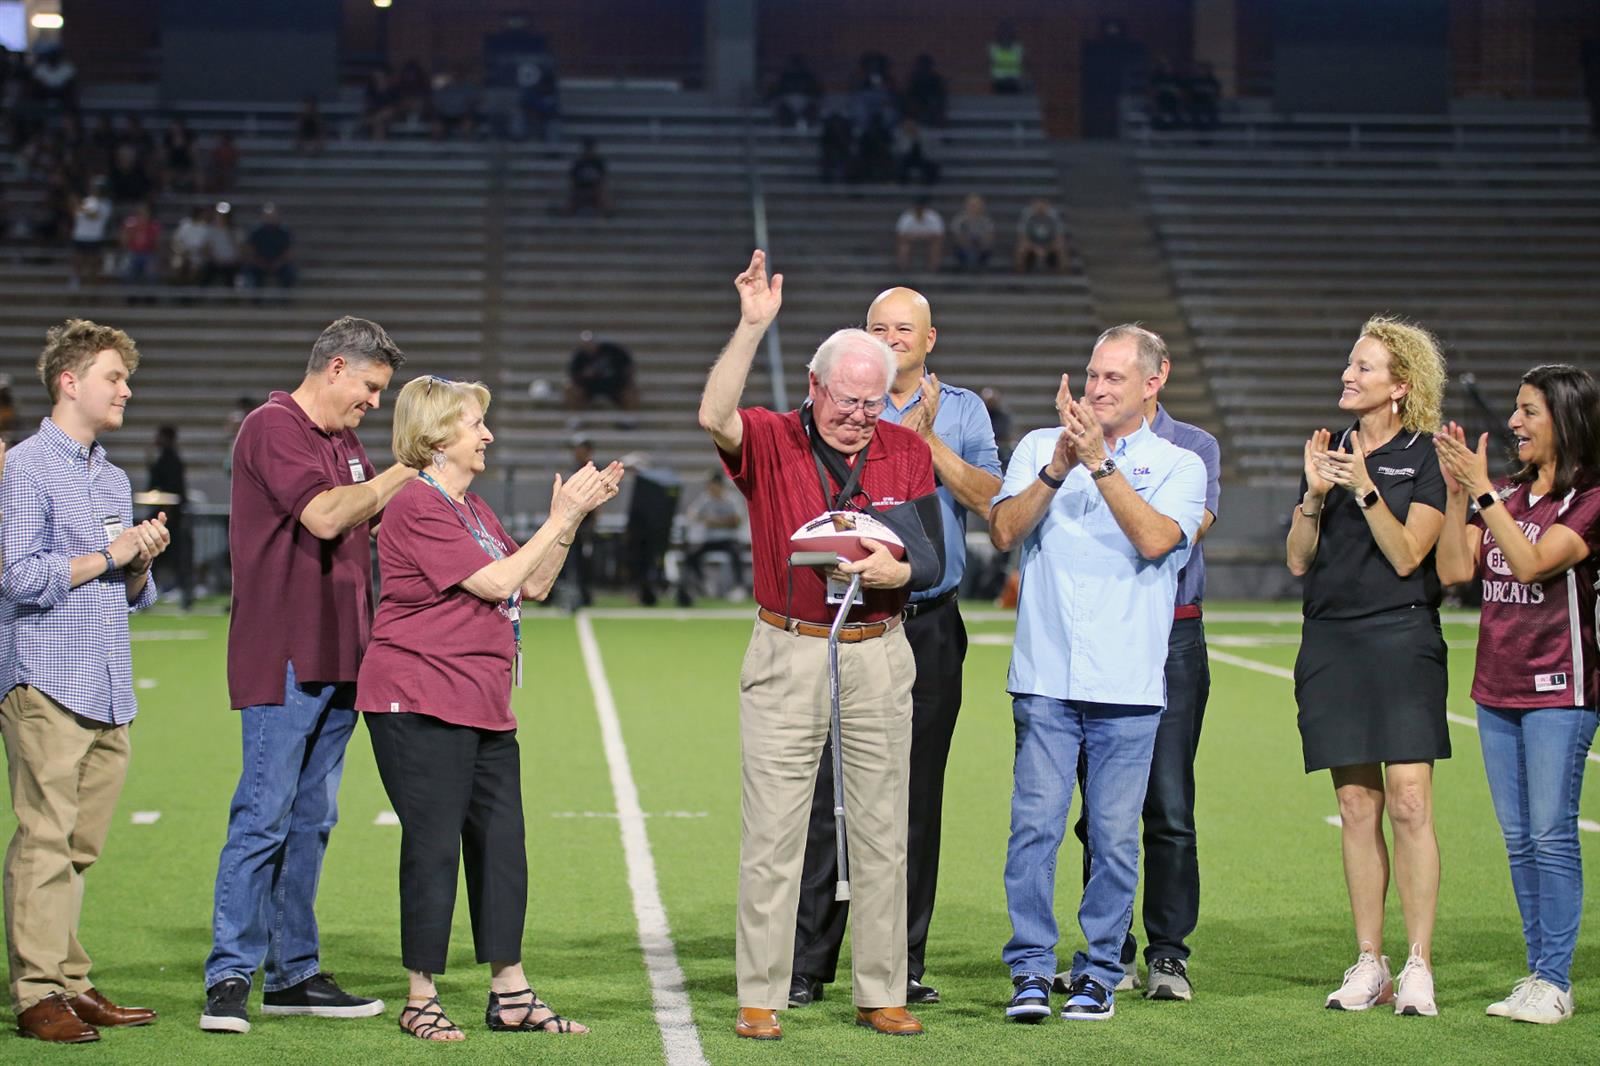 Butch Milks, a sales professional for Balfour All-American and long-time CFISD supporter, was honored for his service.